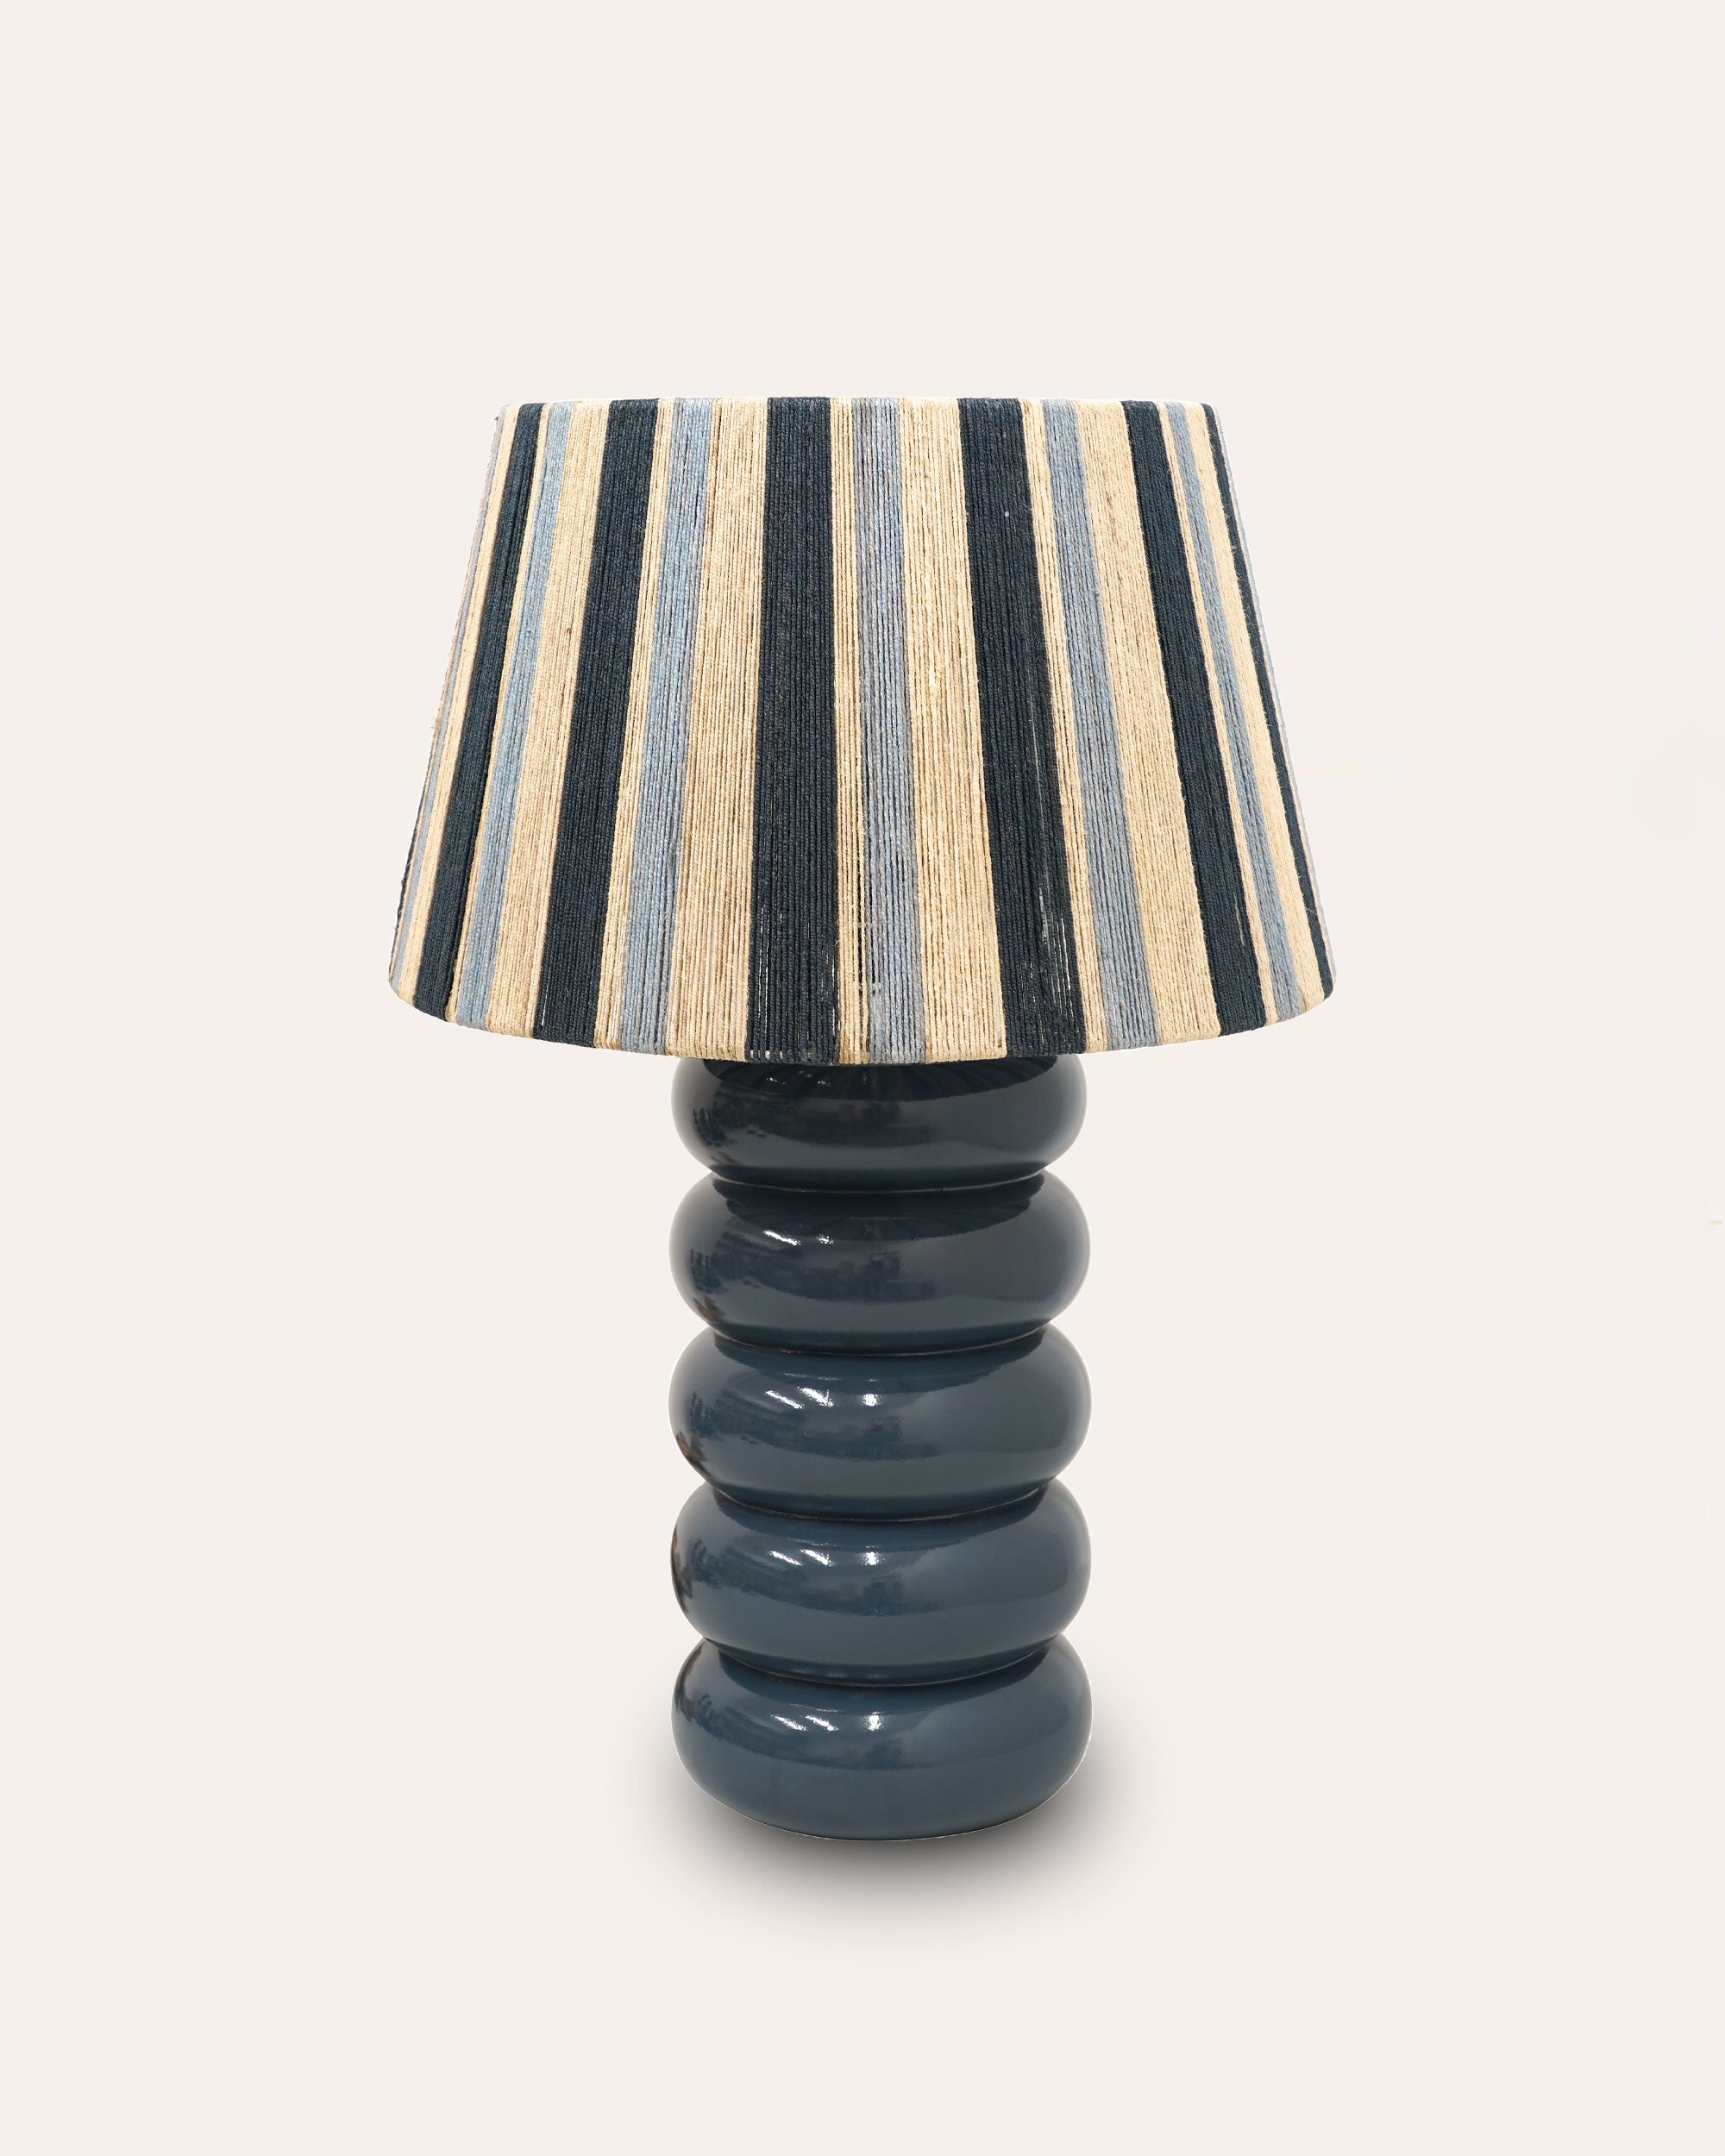 The Must Have Table Lamp - The Bold Blue